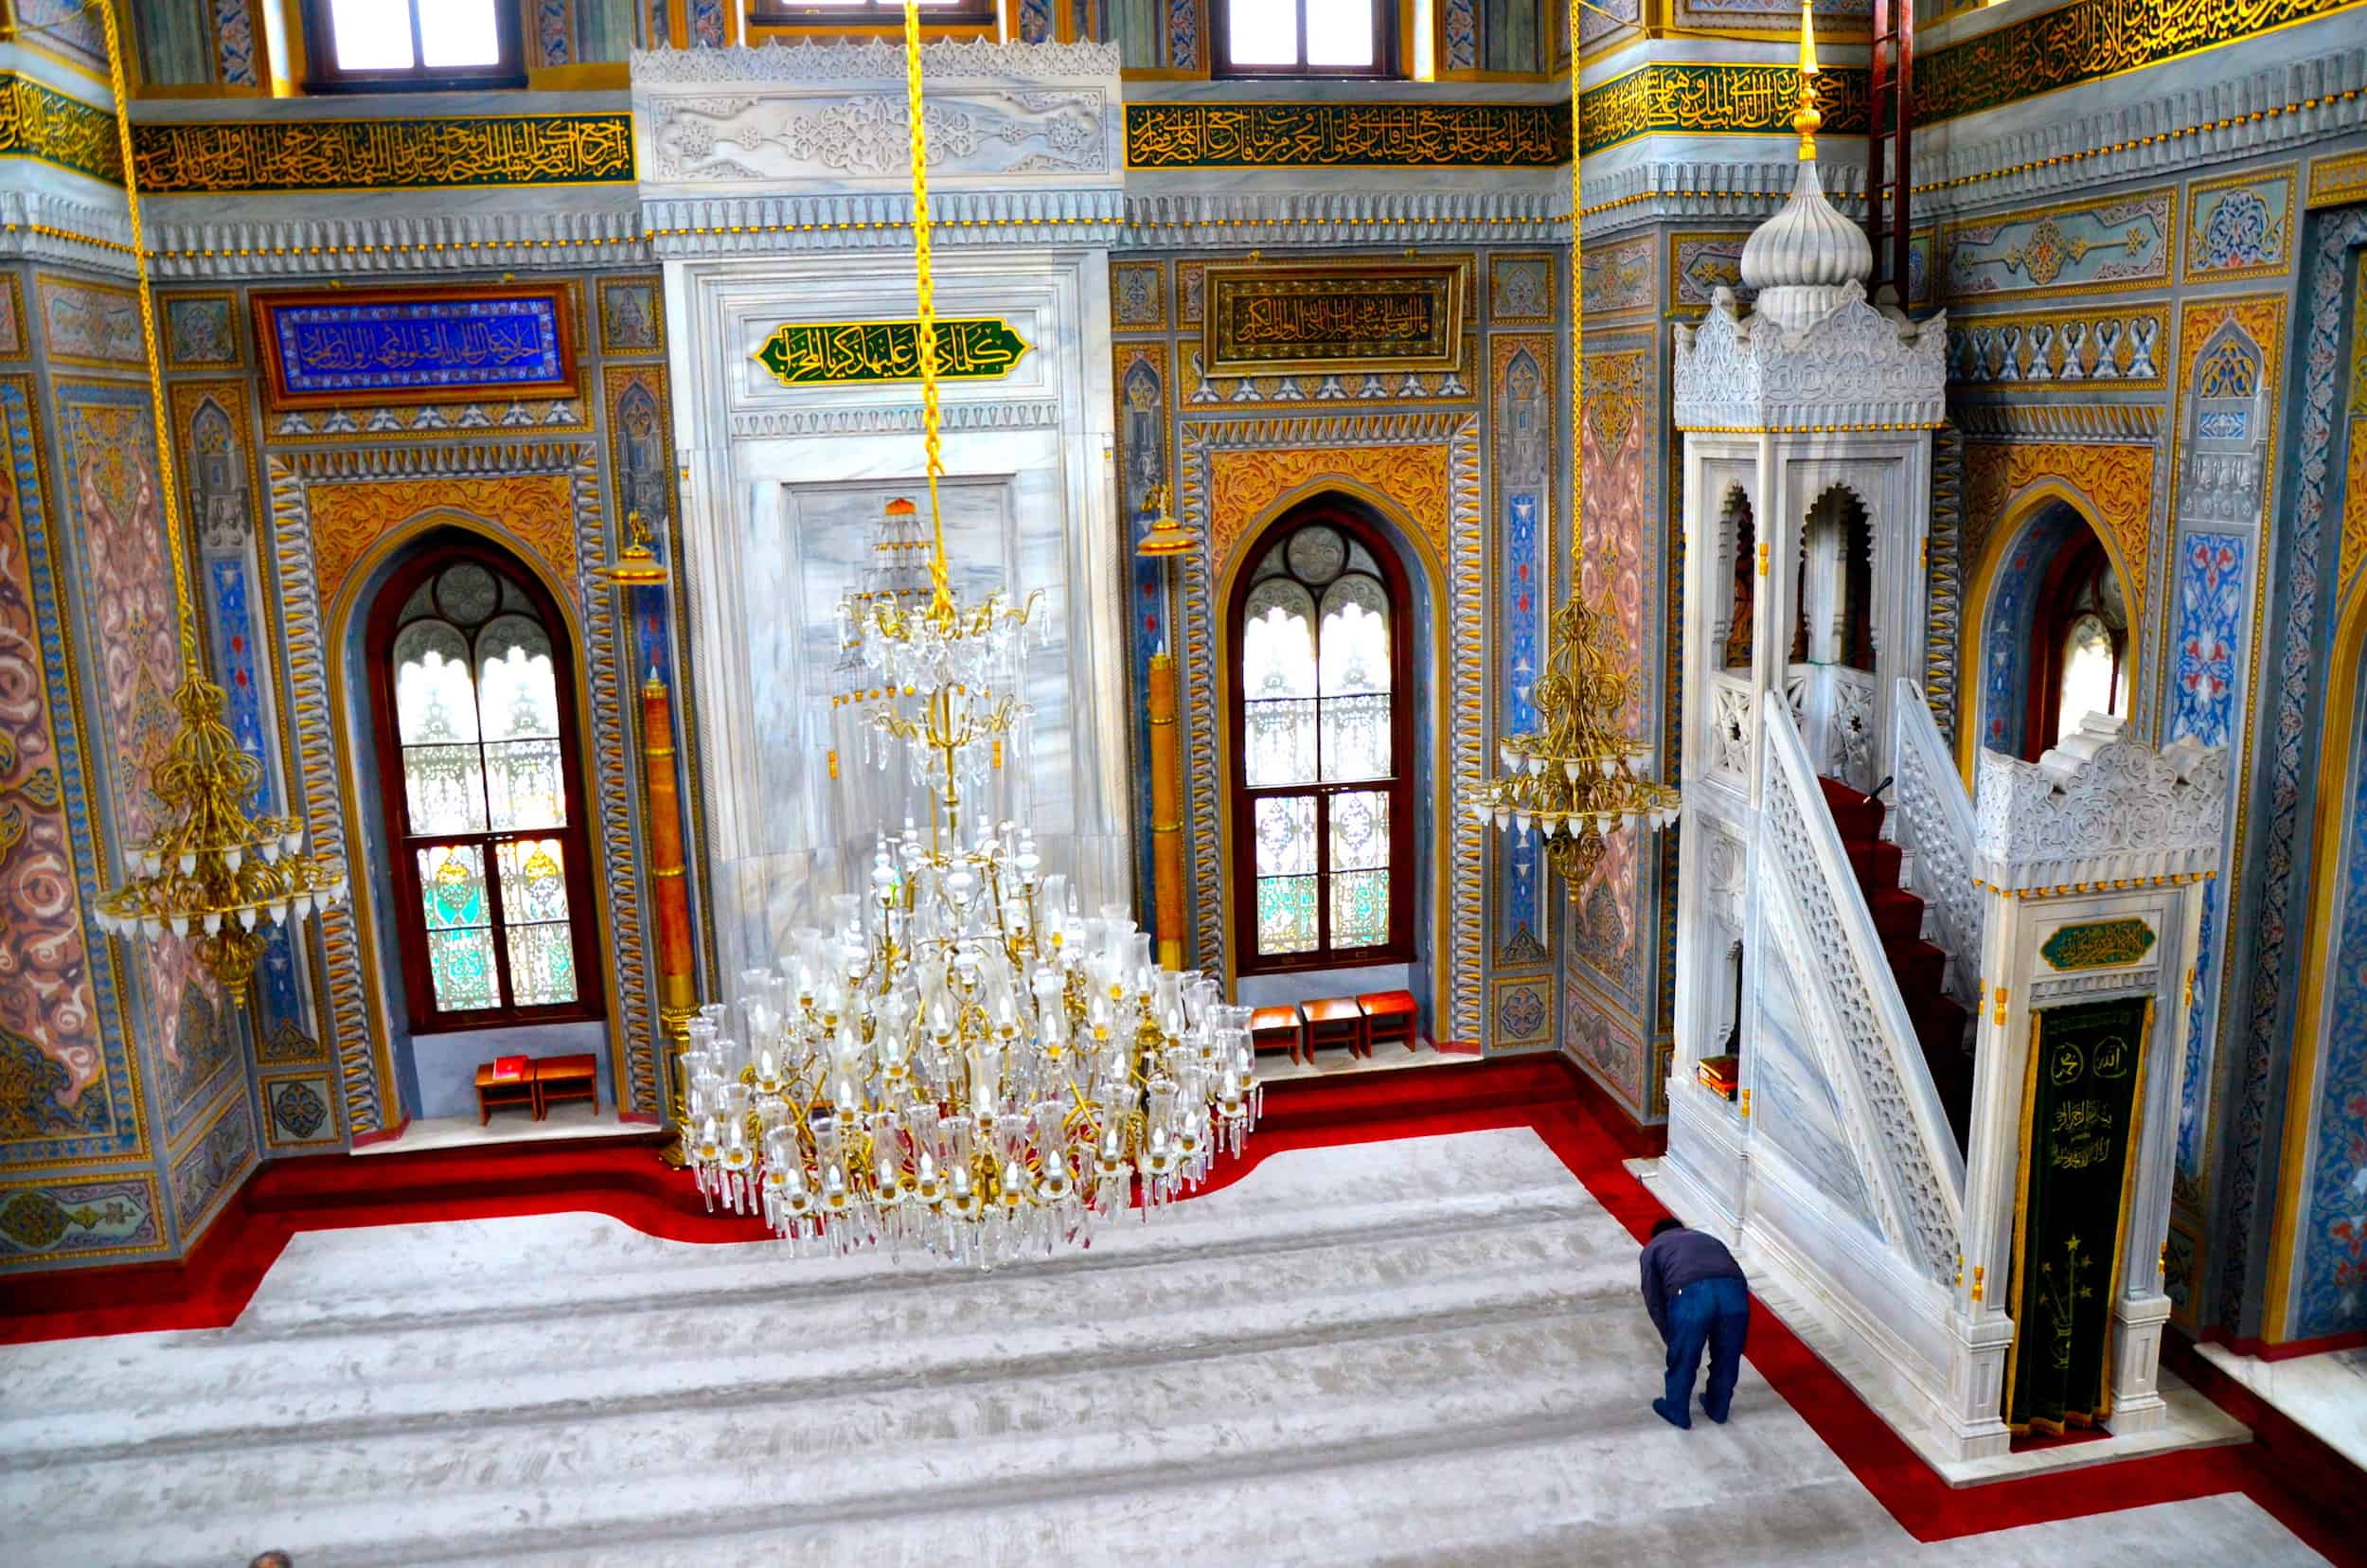 View from the upper gallery of the Pertevniyal Valide Sultan Mosque in Aksaray, Istanbul, Turkey